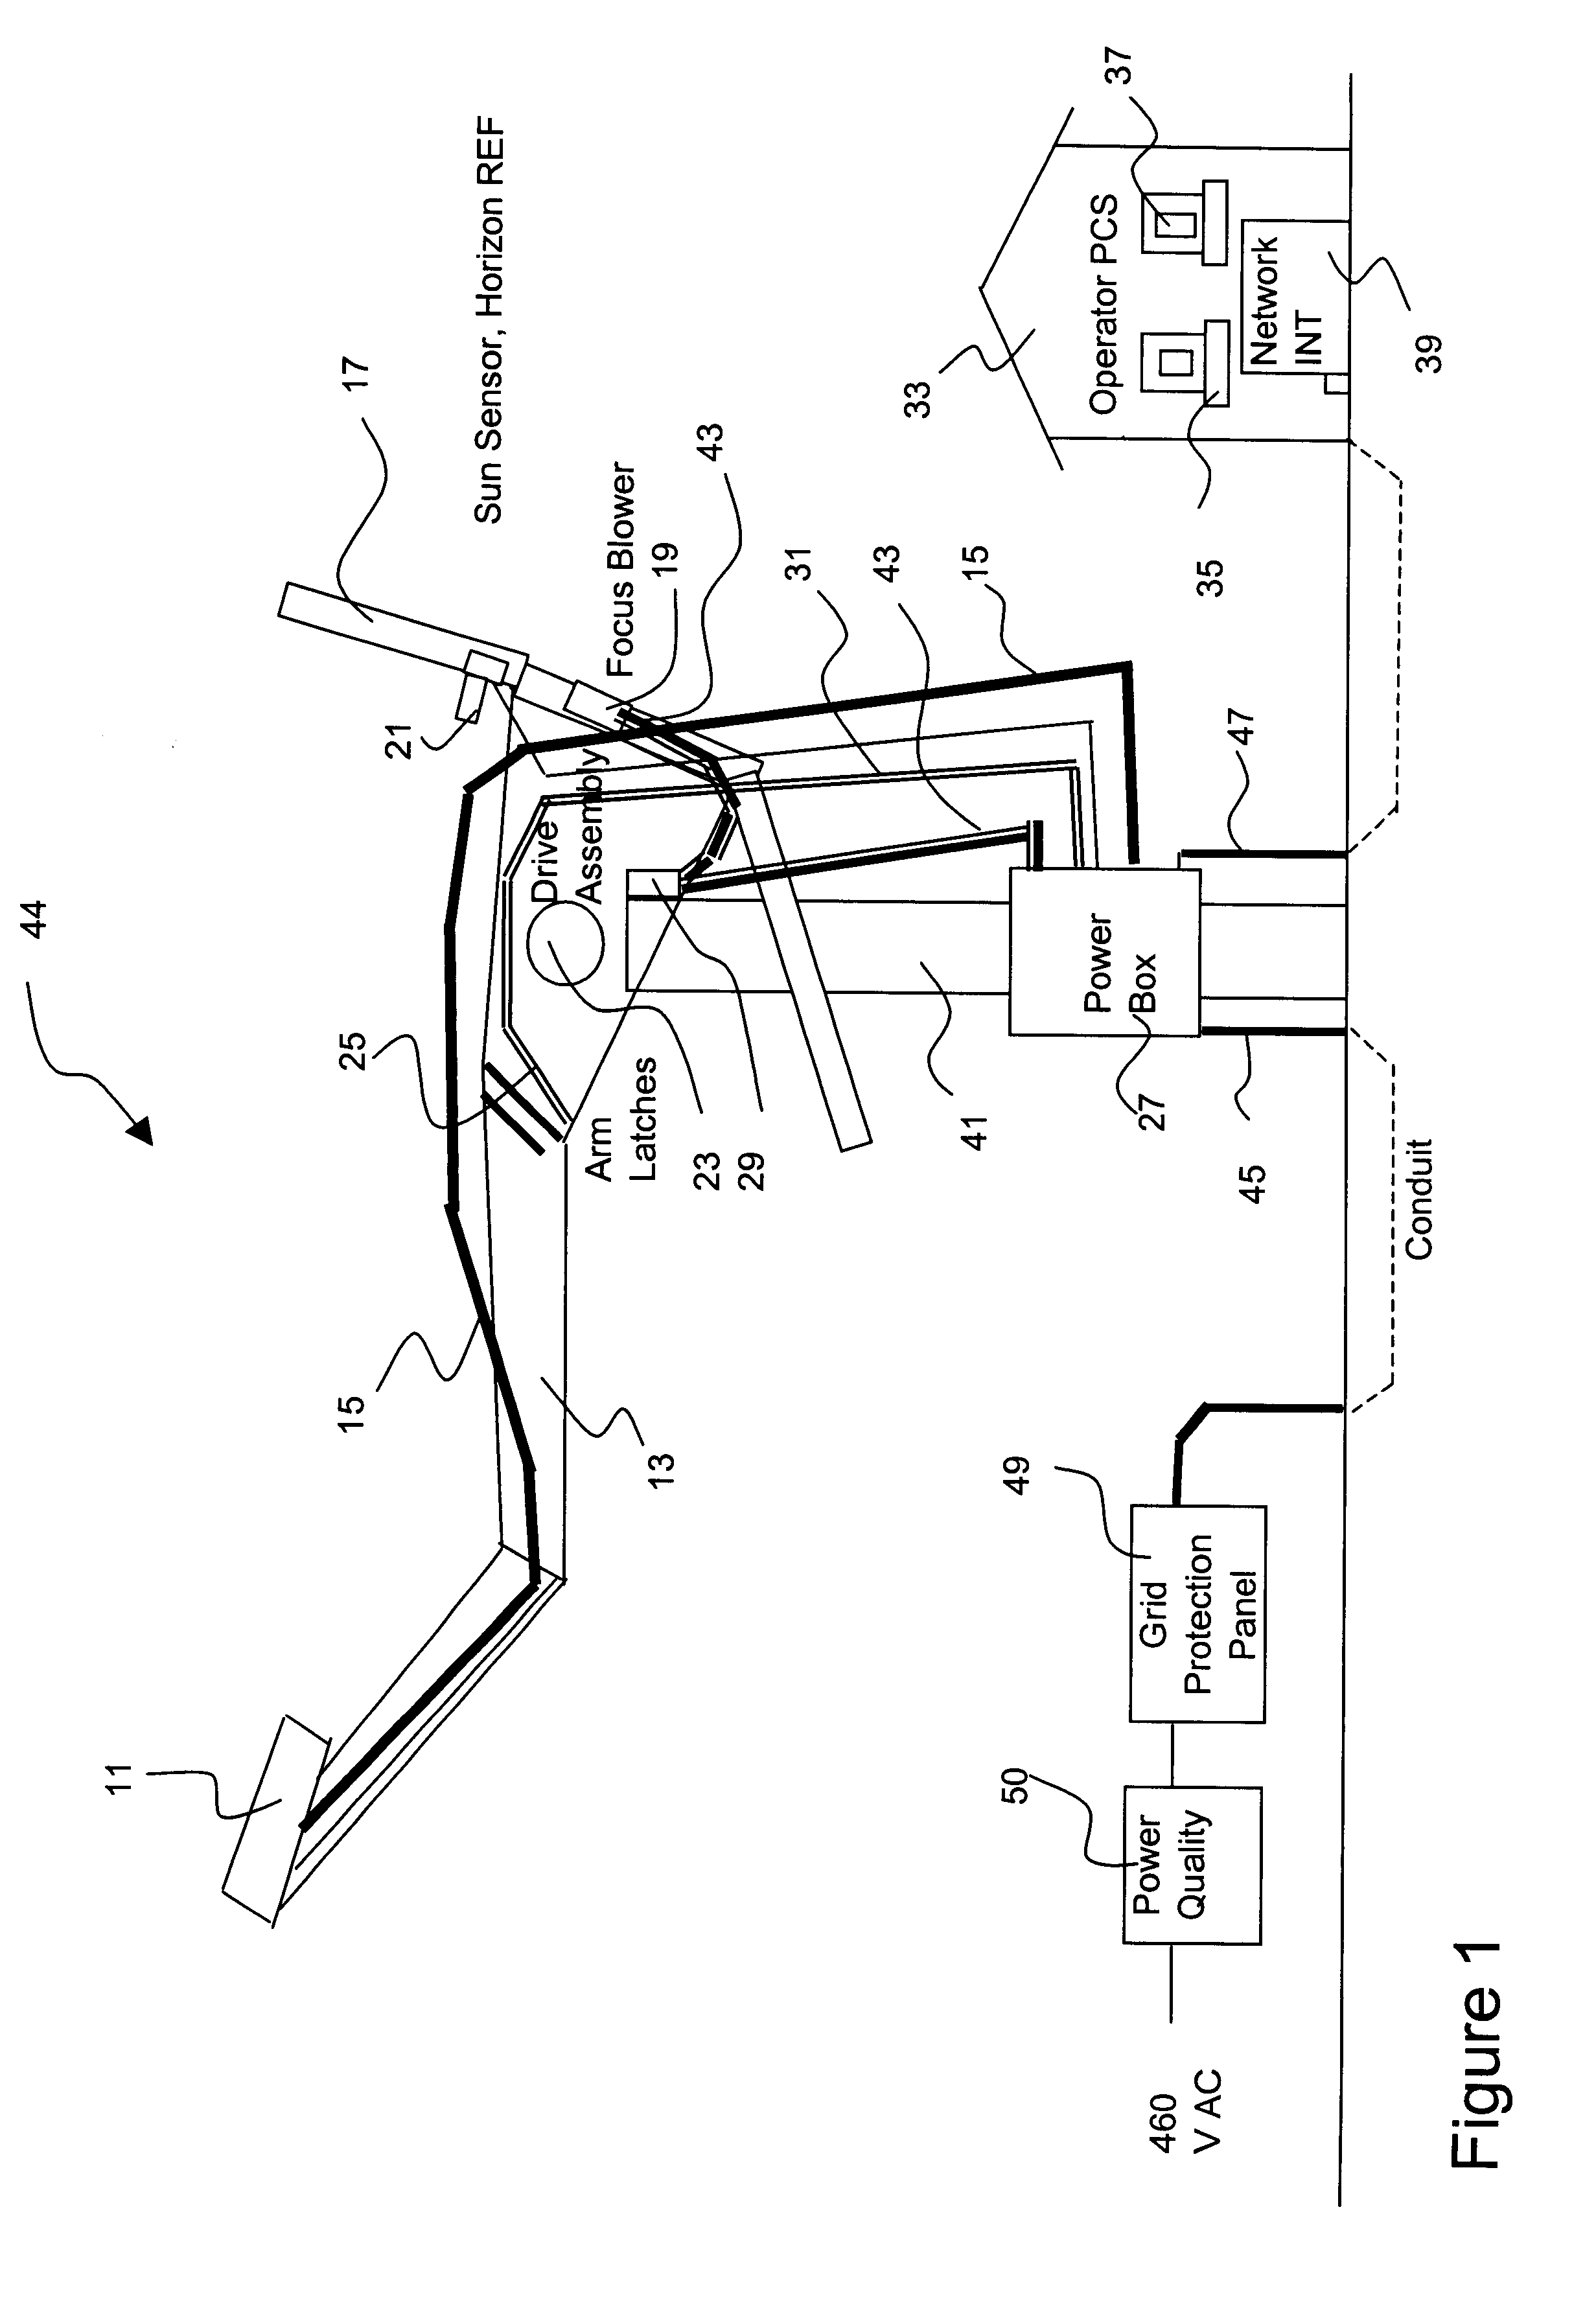 Method and system for controlling operation of an energy conversion device